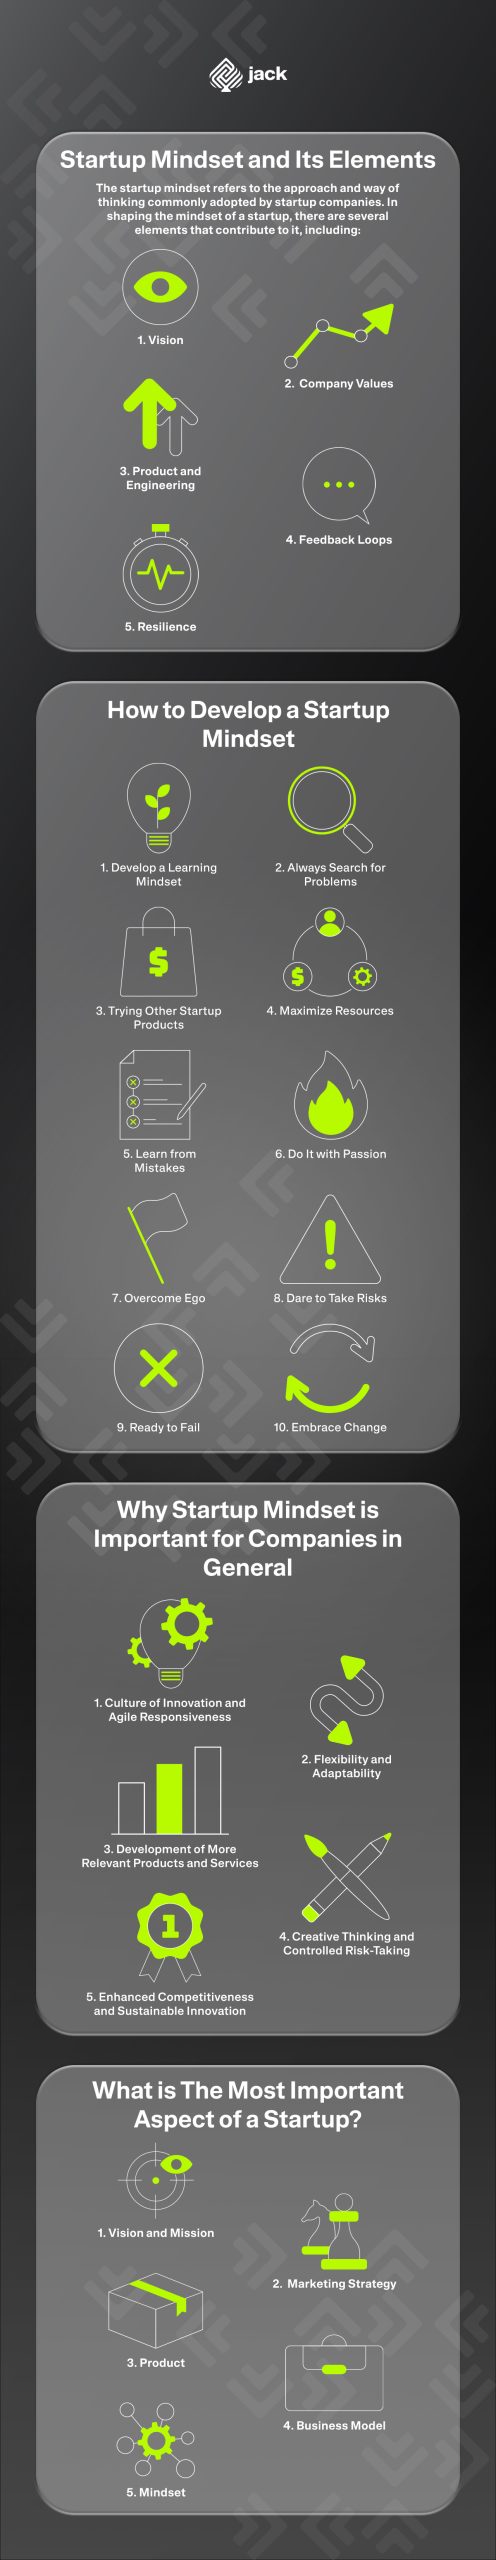 How to Shape a Startup Mindset? Here's the Answer!